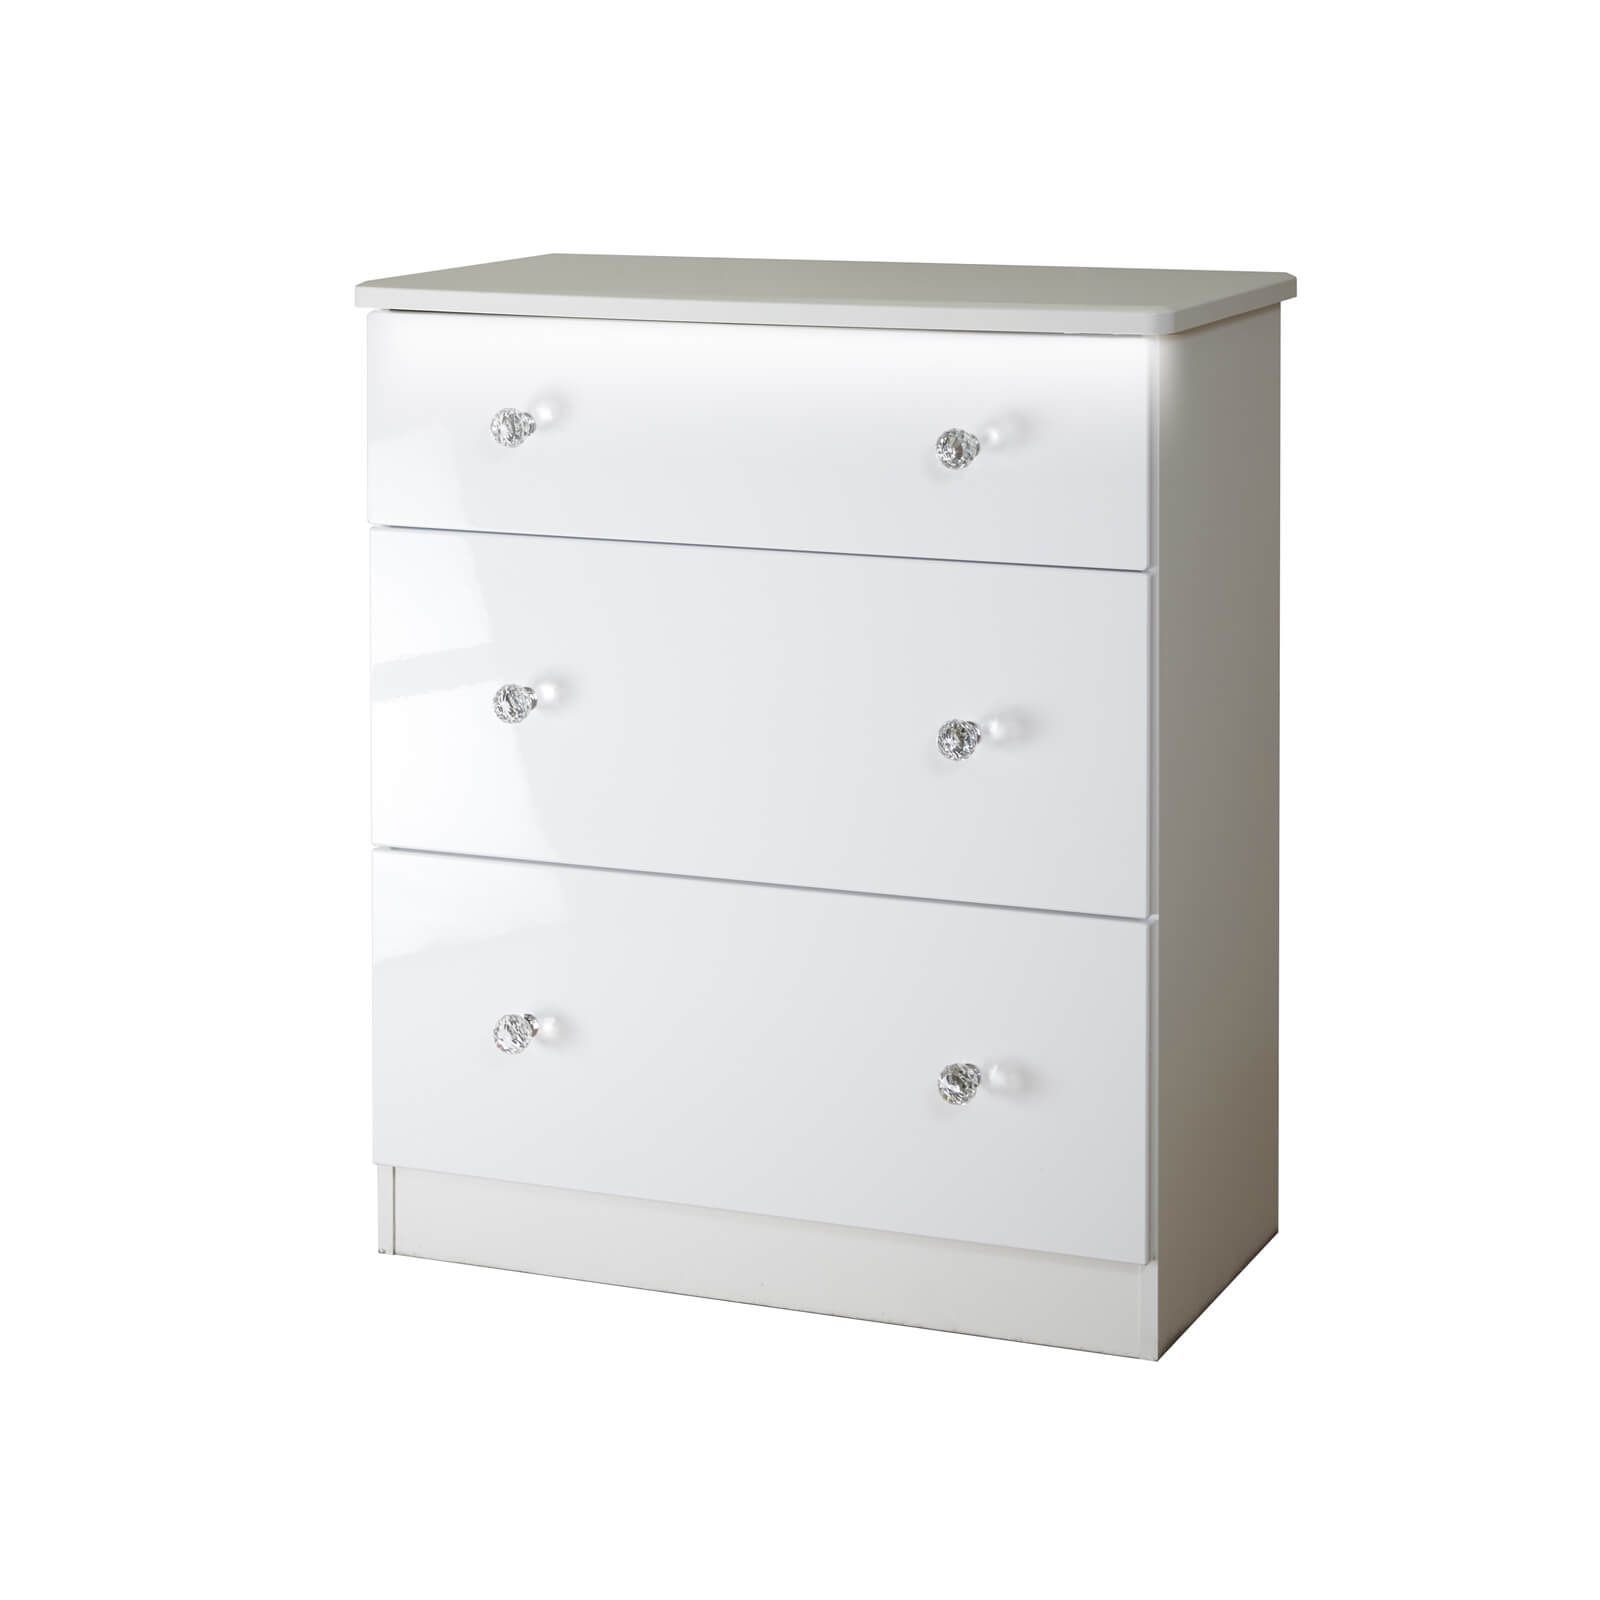 Lumo 3 Drawer Deep Chest with LED Lighting - White